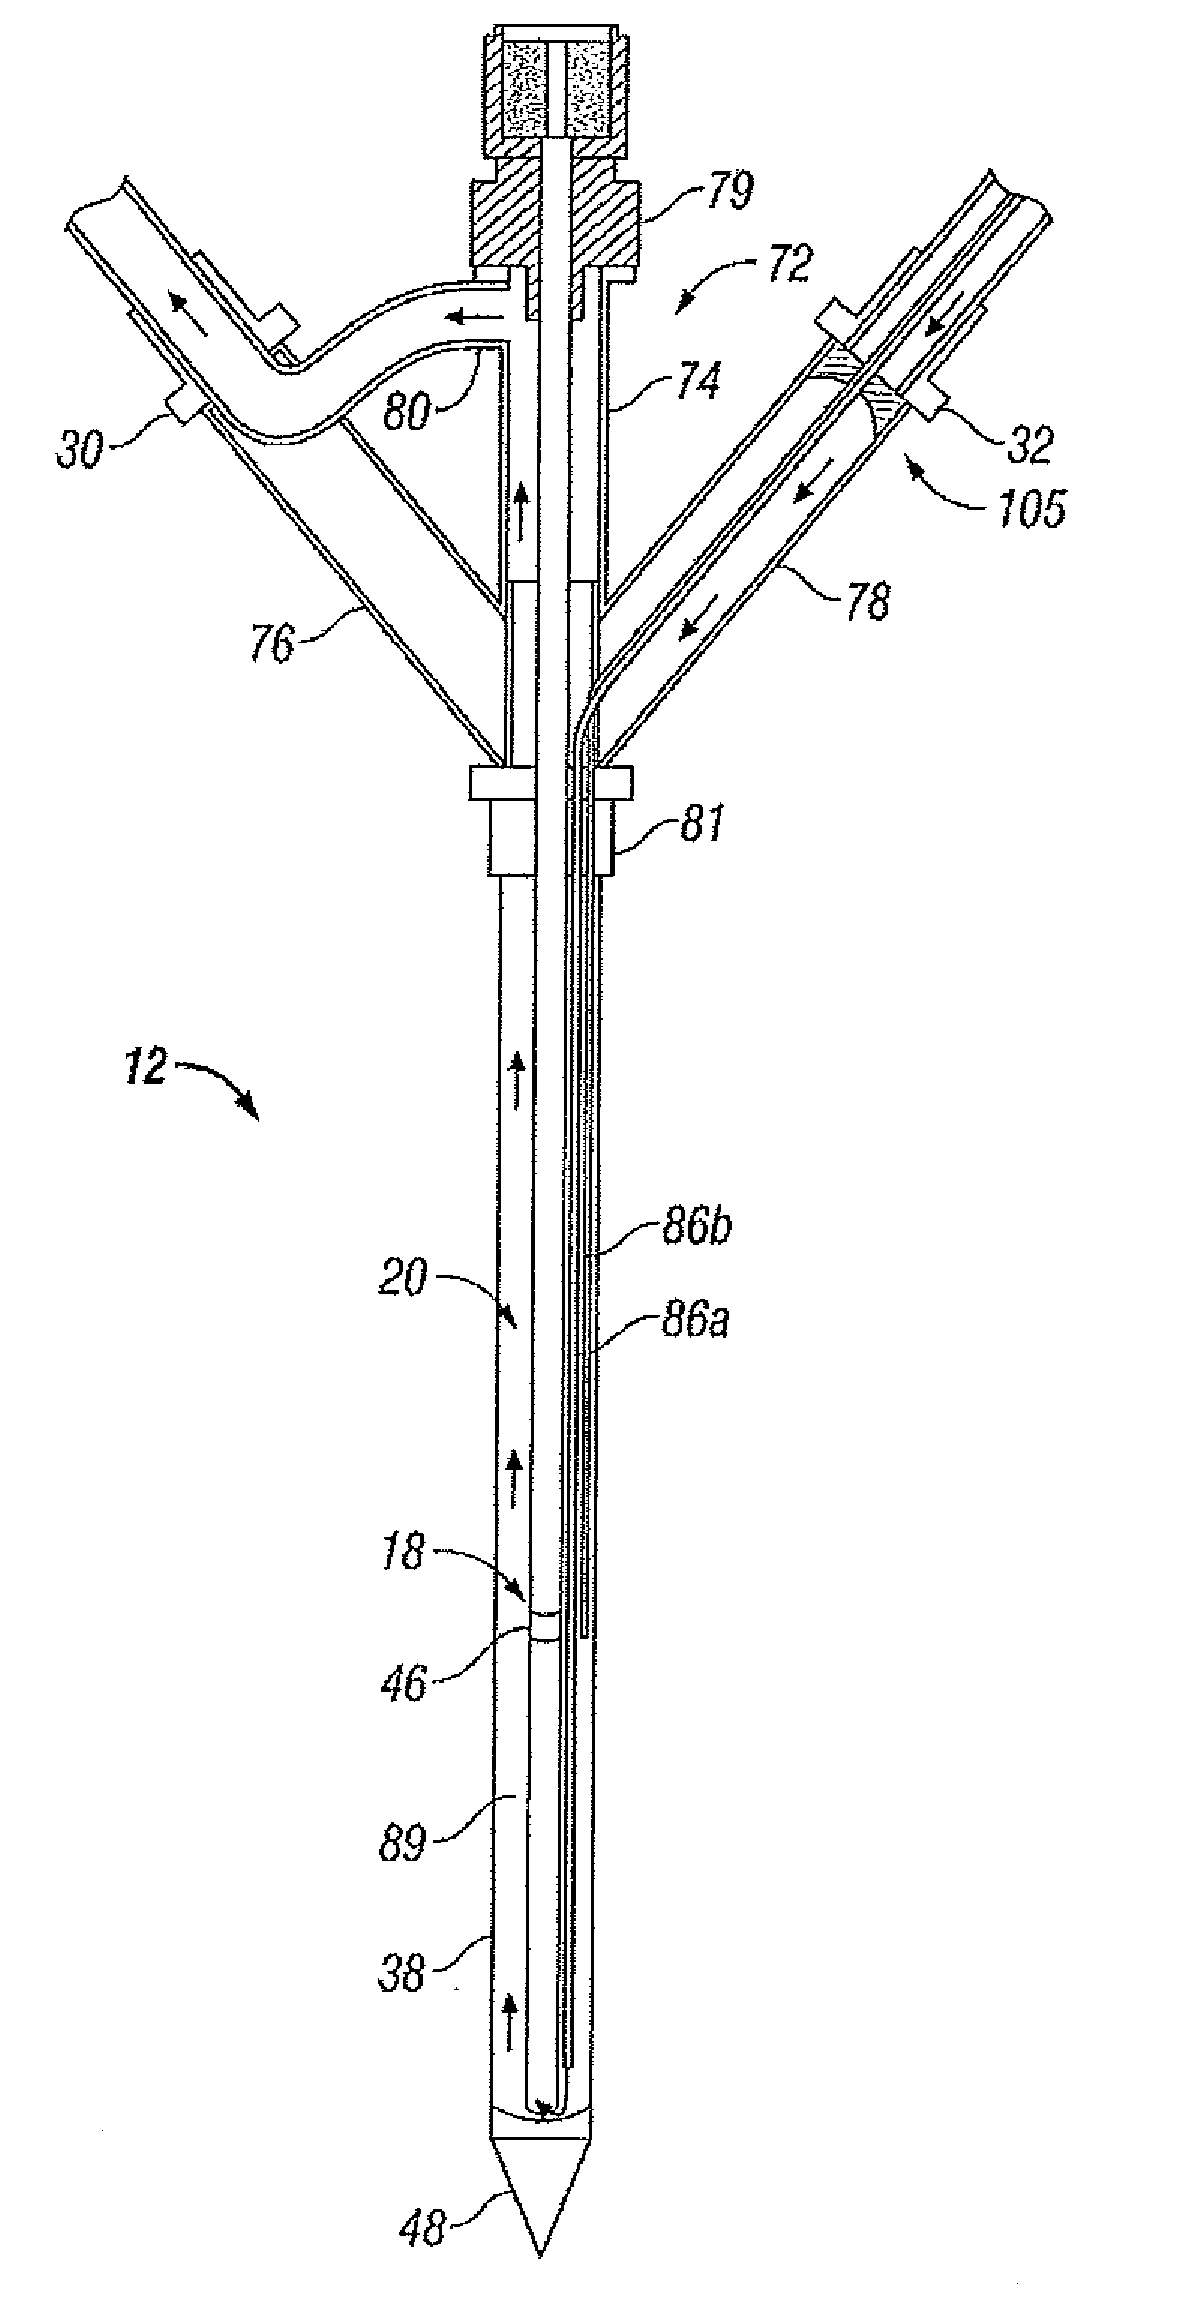 System and Method for Performing an Ablation Procedure